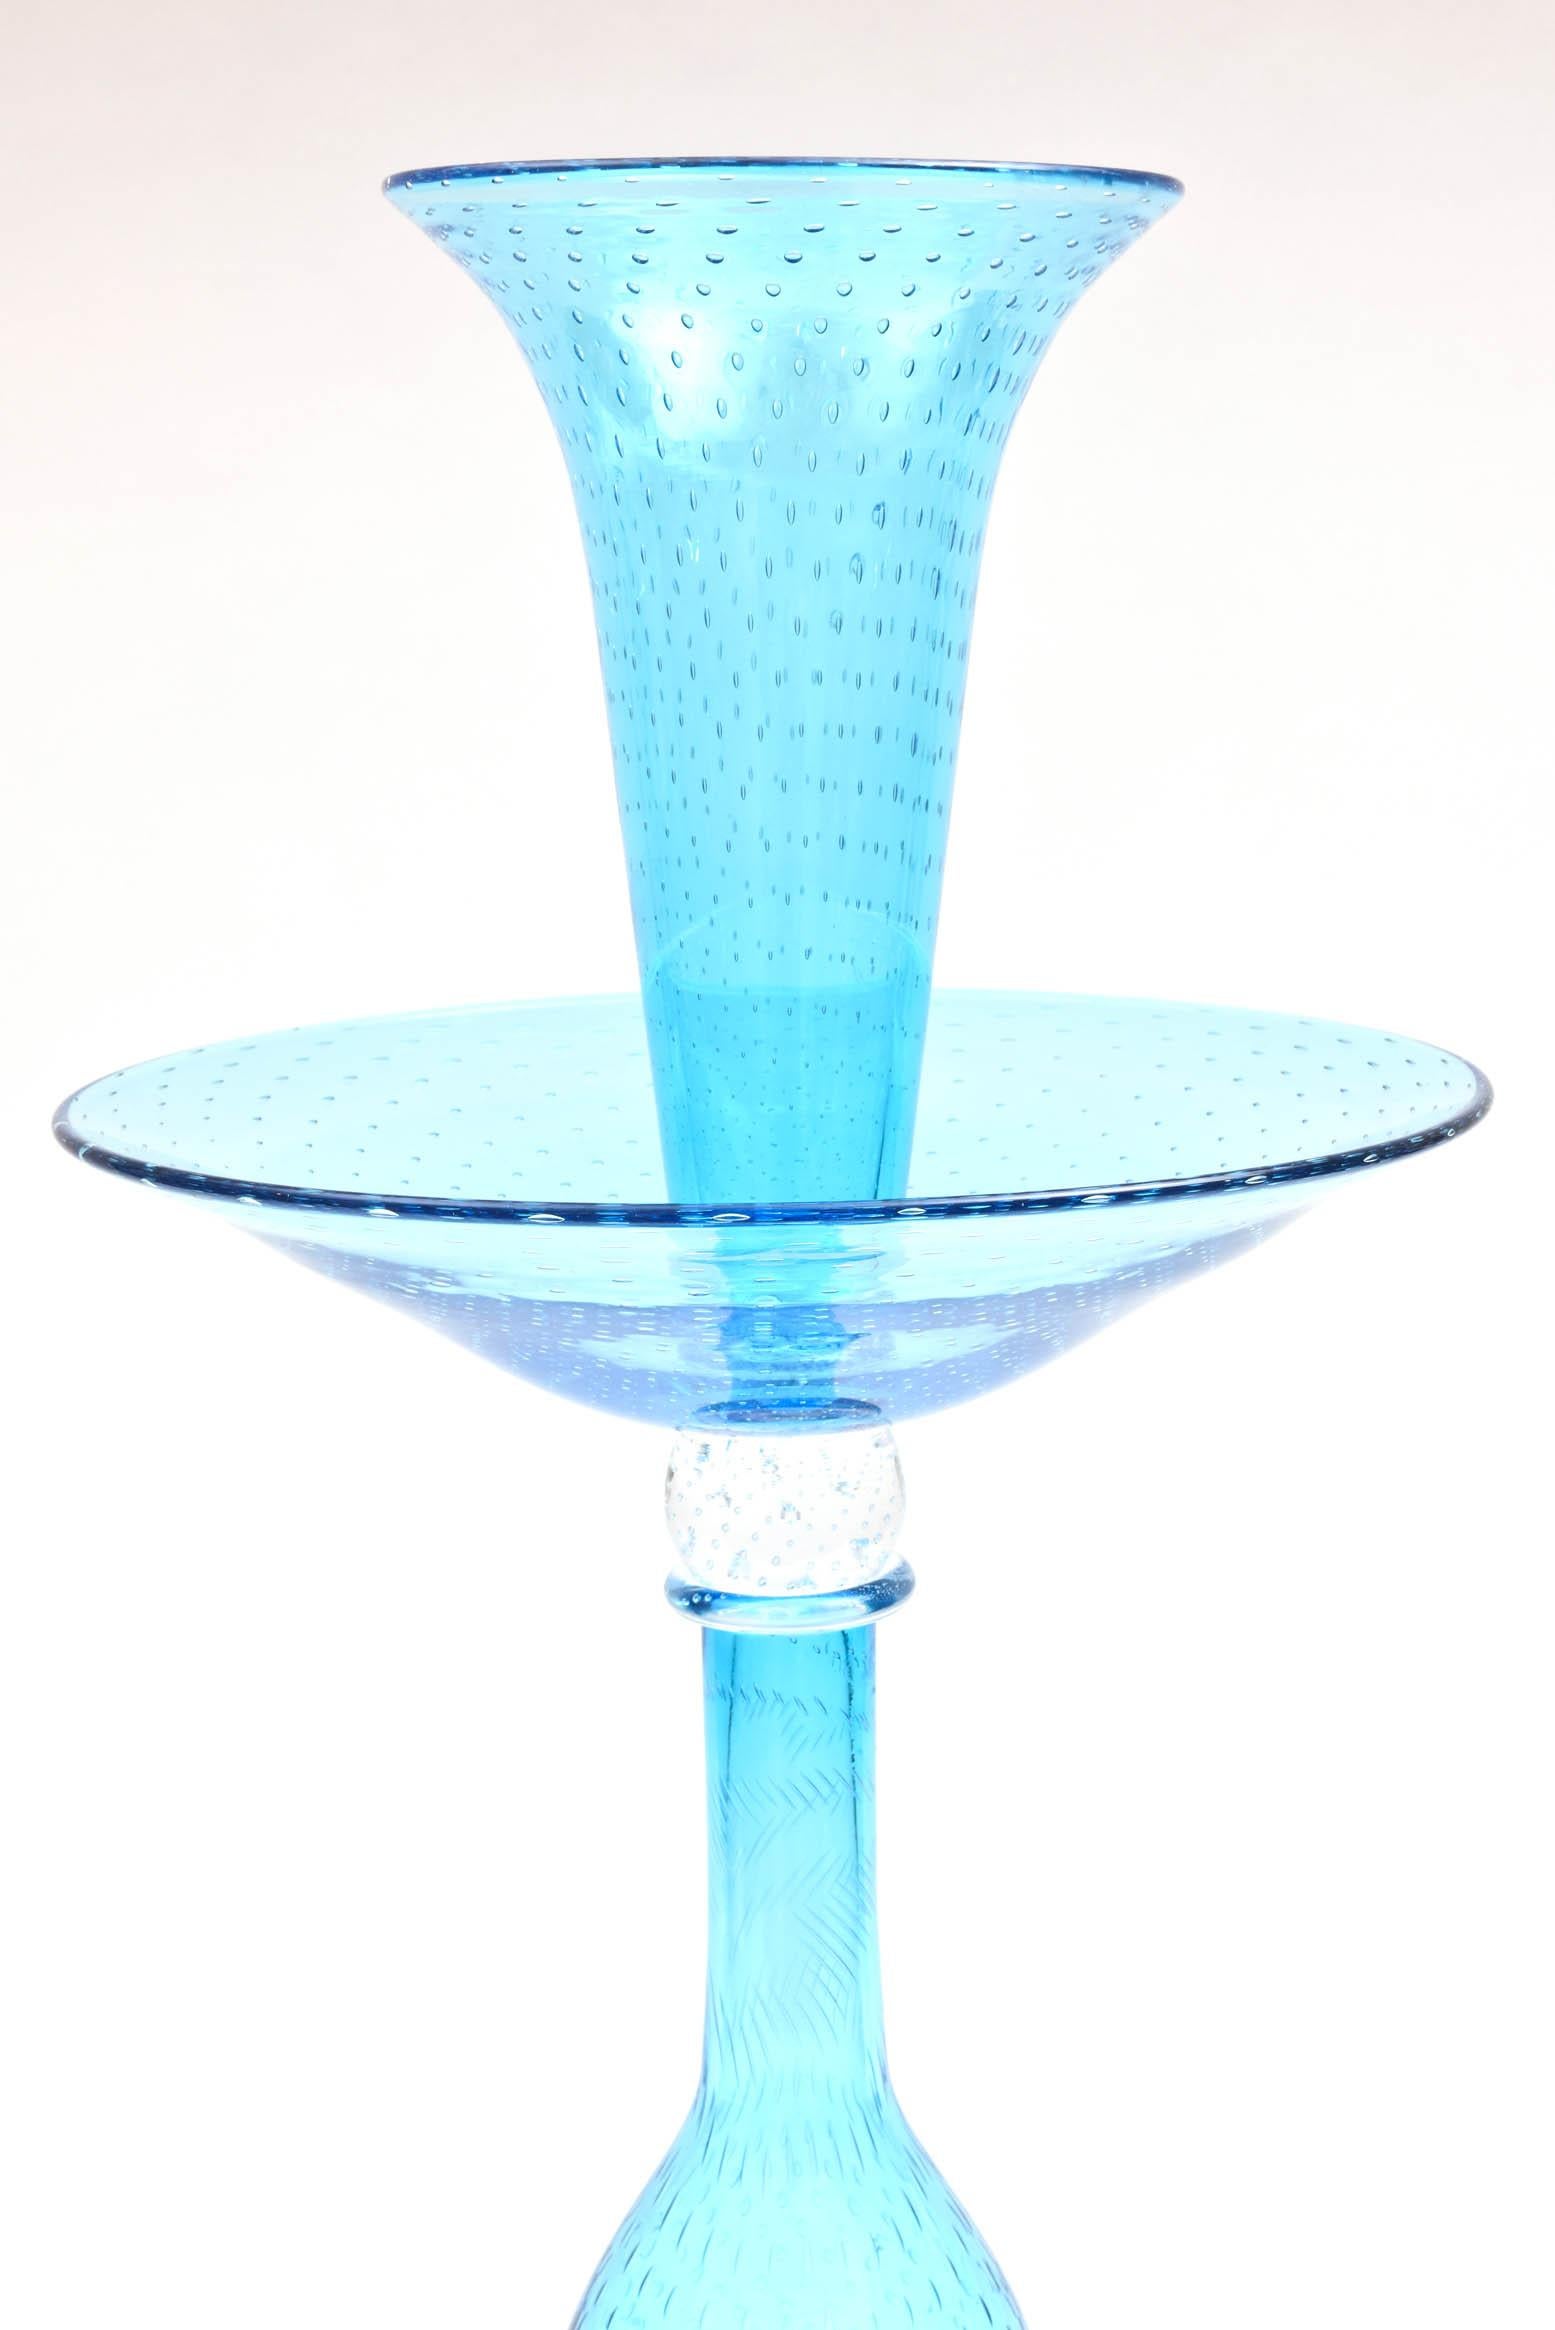 An exquisite tall and impressive centerpiece that we have commissioned from original archives. Beautiful and hard to find turquoise blue with signature controlled bubble base created by master glass blowers using original equipment and centuries old